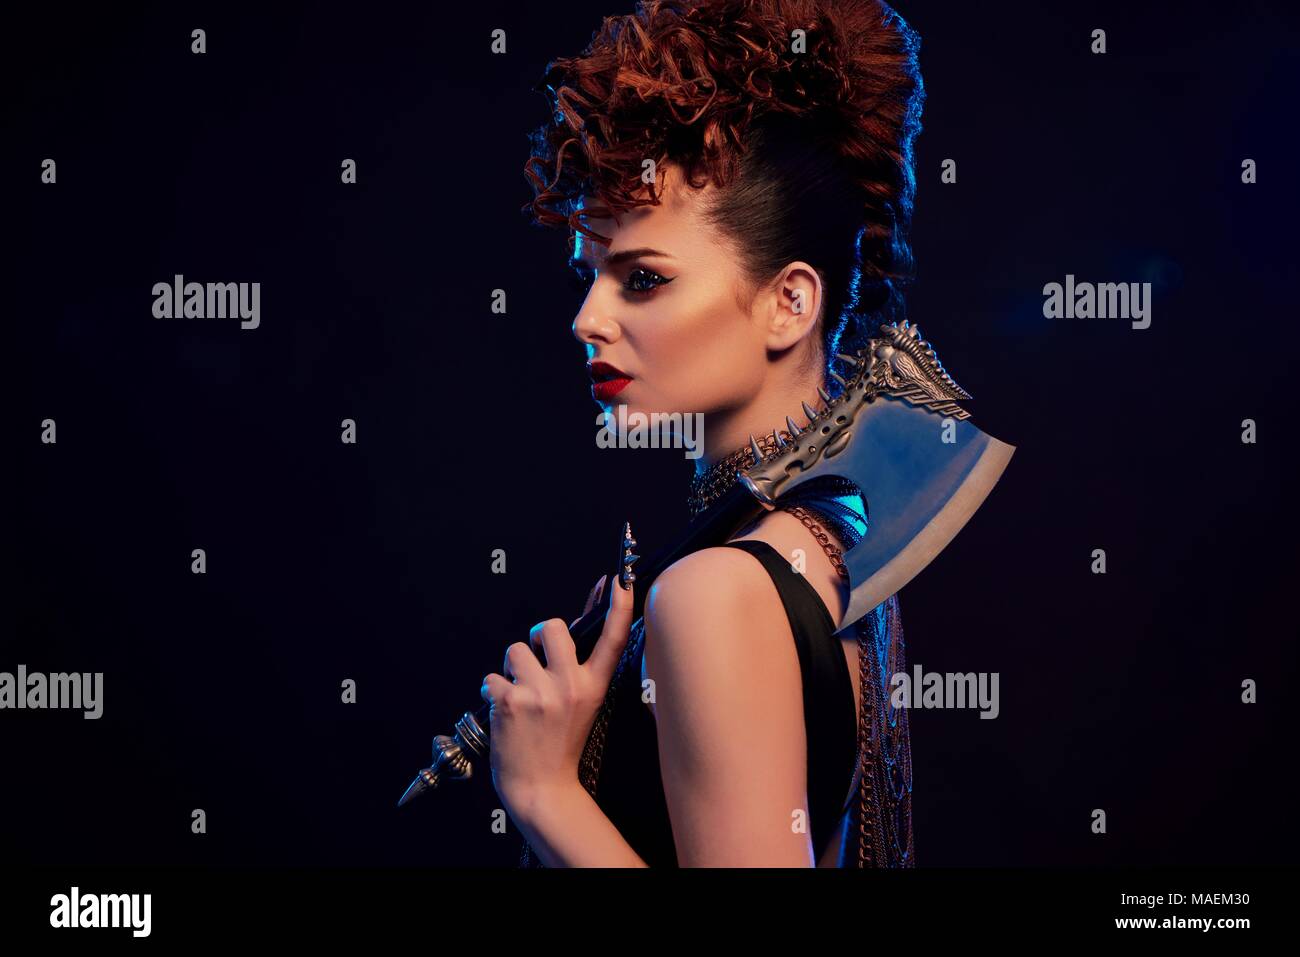 Young beatiful warrior girl holding sharp metallic axe with thorns. Model wears bright original make up and fashionable, stylish hairdress, chains with crosses on her neck. Black studio background. Stock Photo